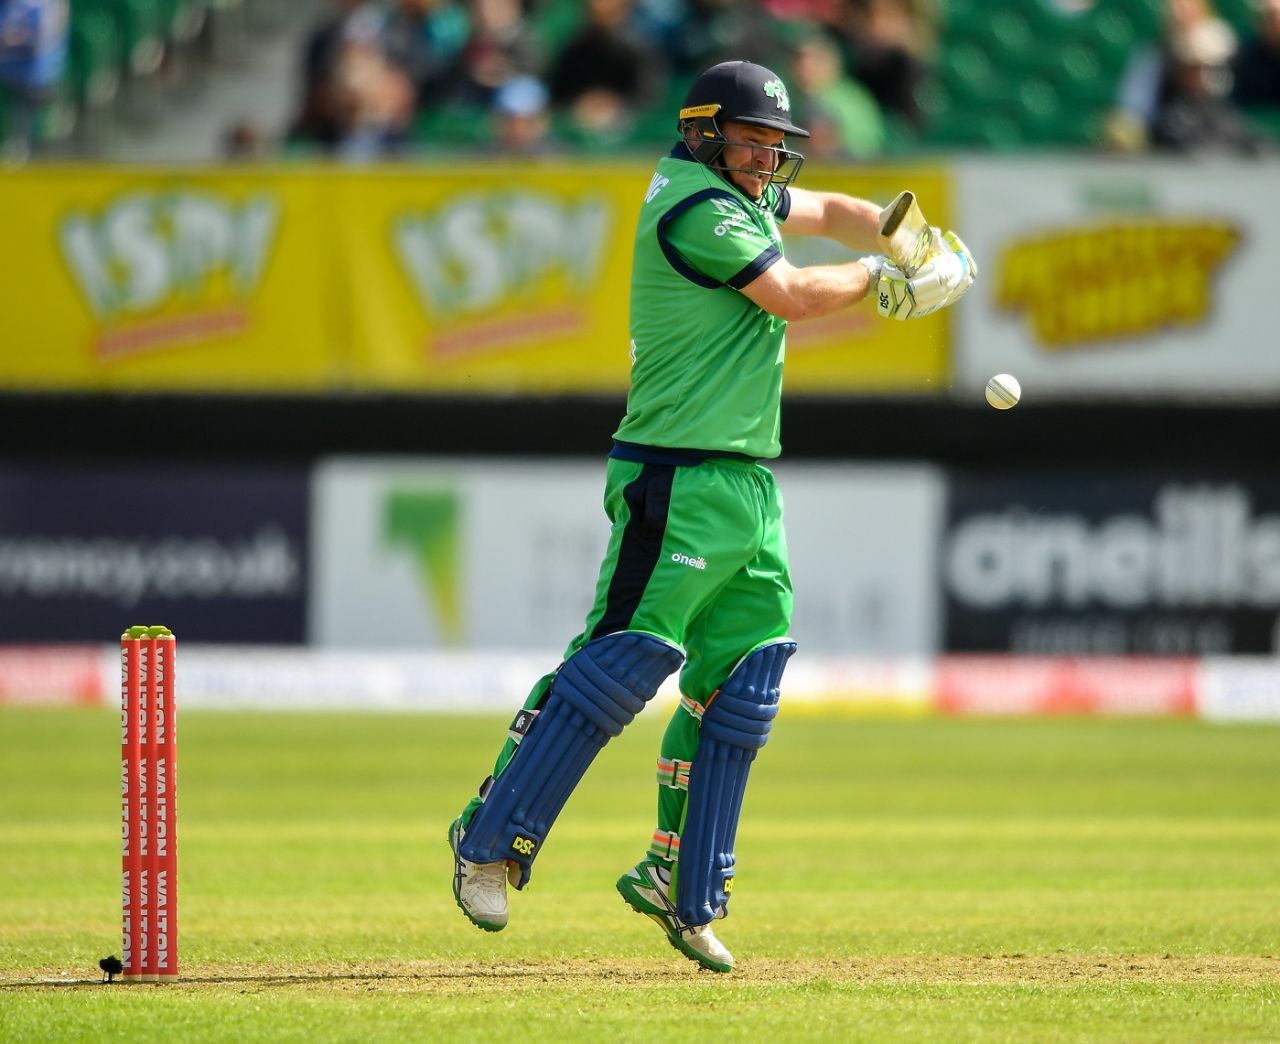 Paul Stirling gets on top of the bounce, Ireland v West Indies, Match 4, Ireland tri-series, Dublin, May 11, 2019